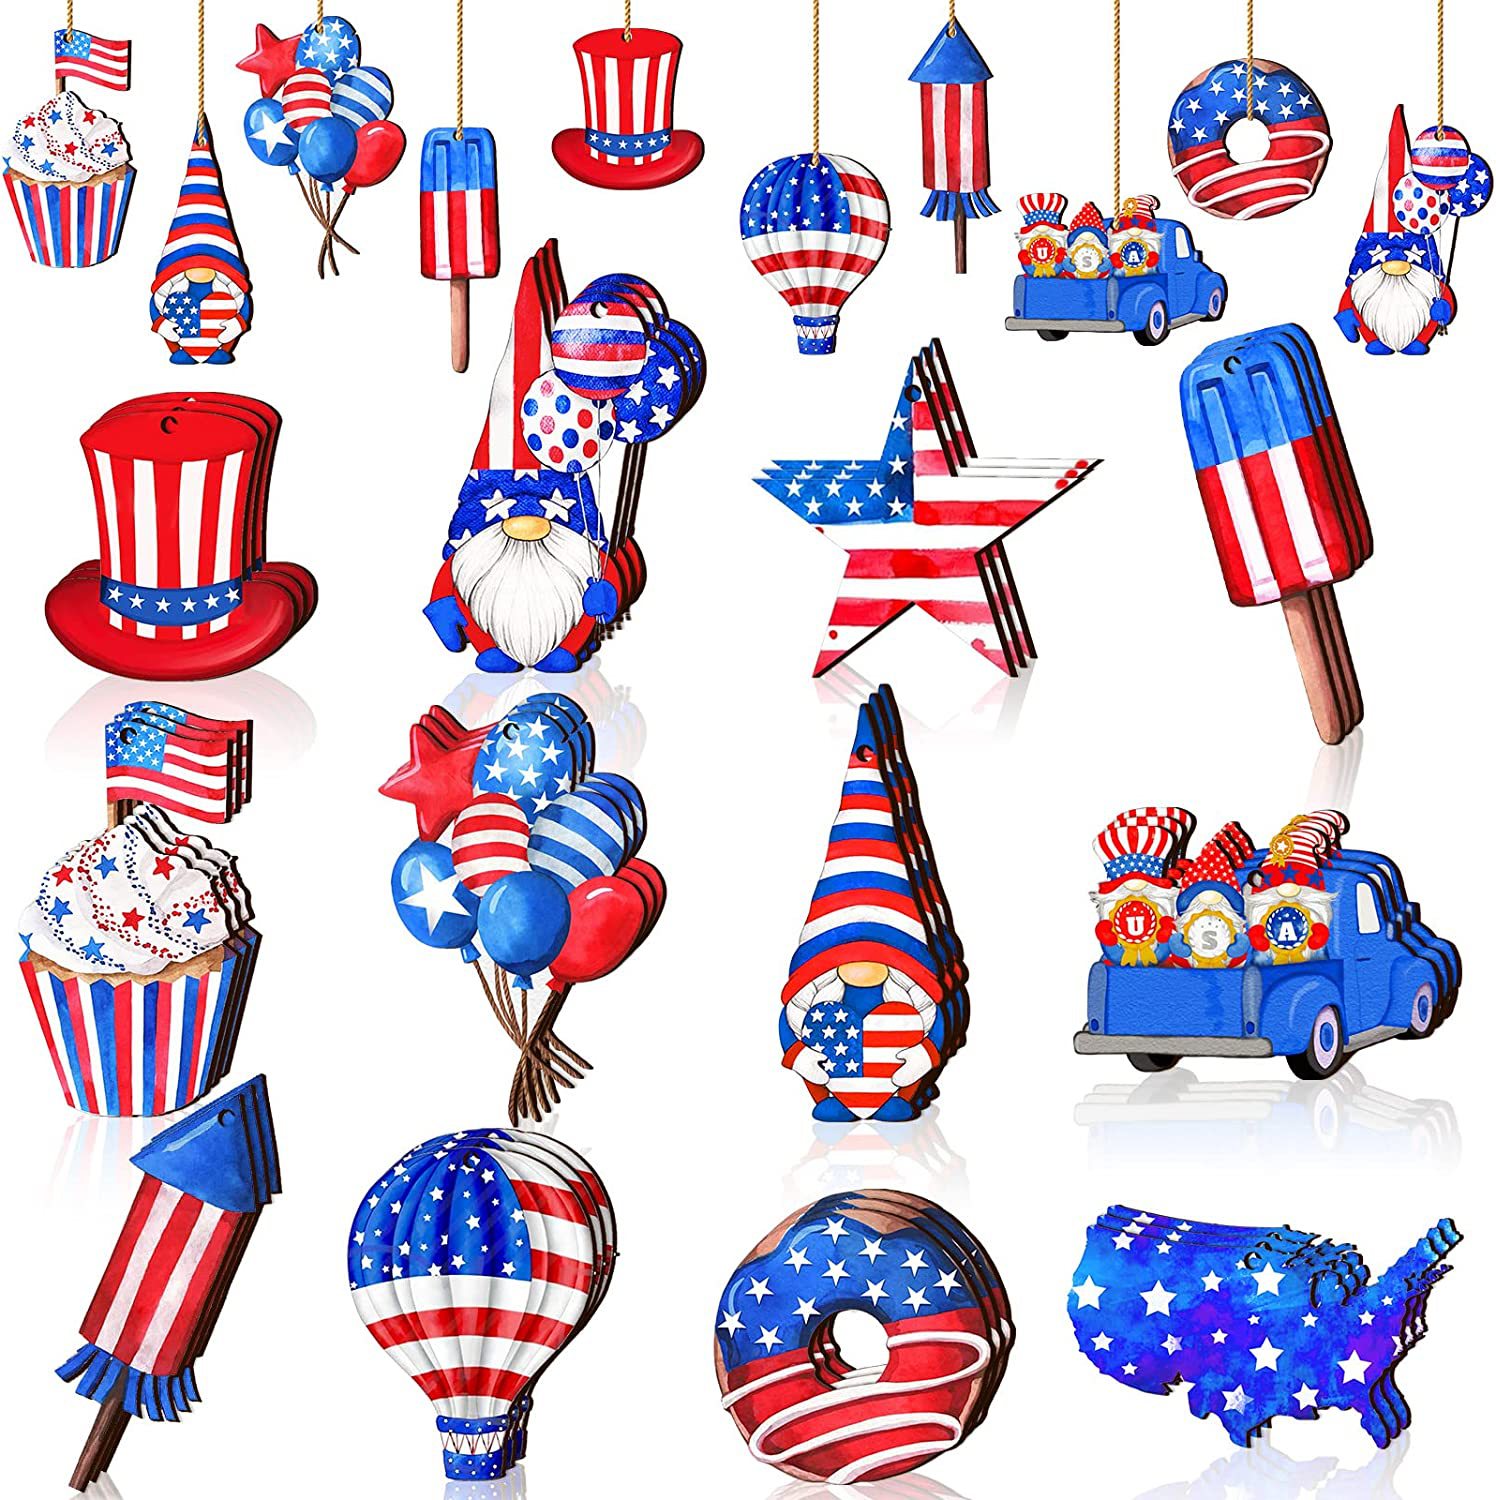 Celebrate Independence Day with 36-Piece Patriotic Ornament Set for Tree Decoration